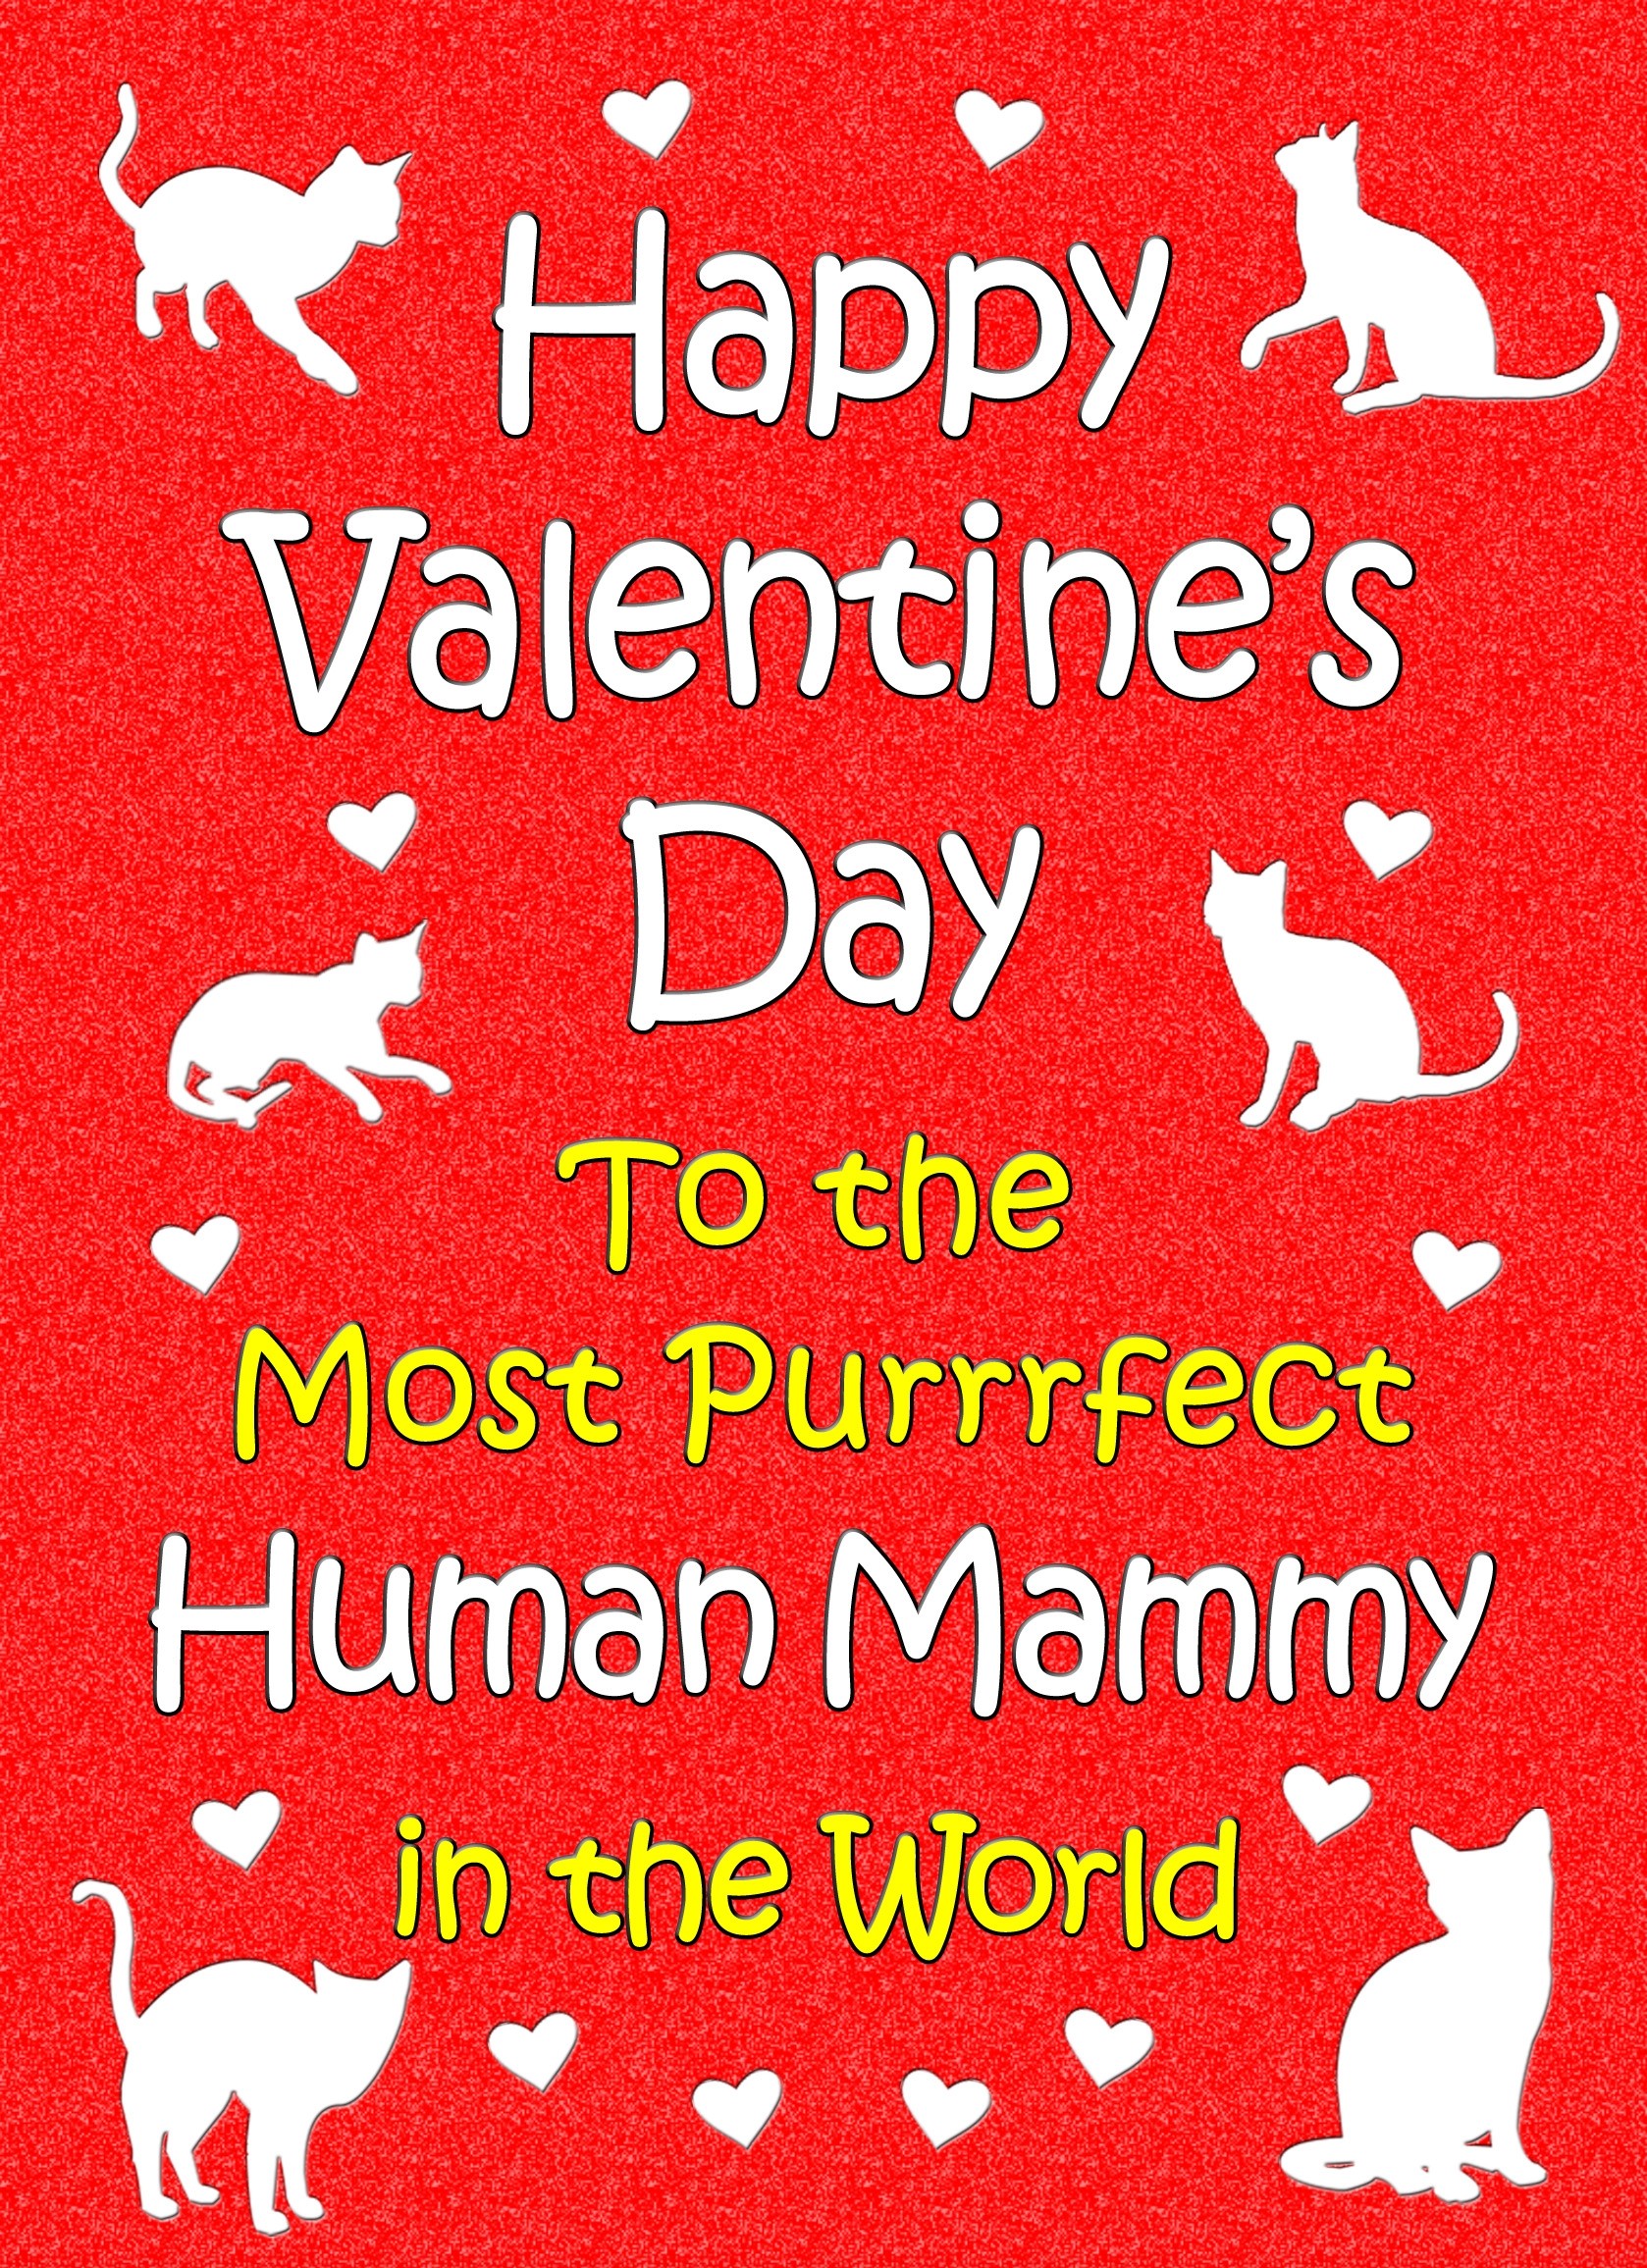 From The Cat Valentines Day Card (Human Mammy)